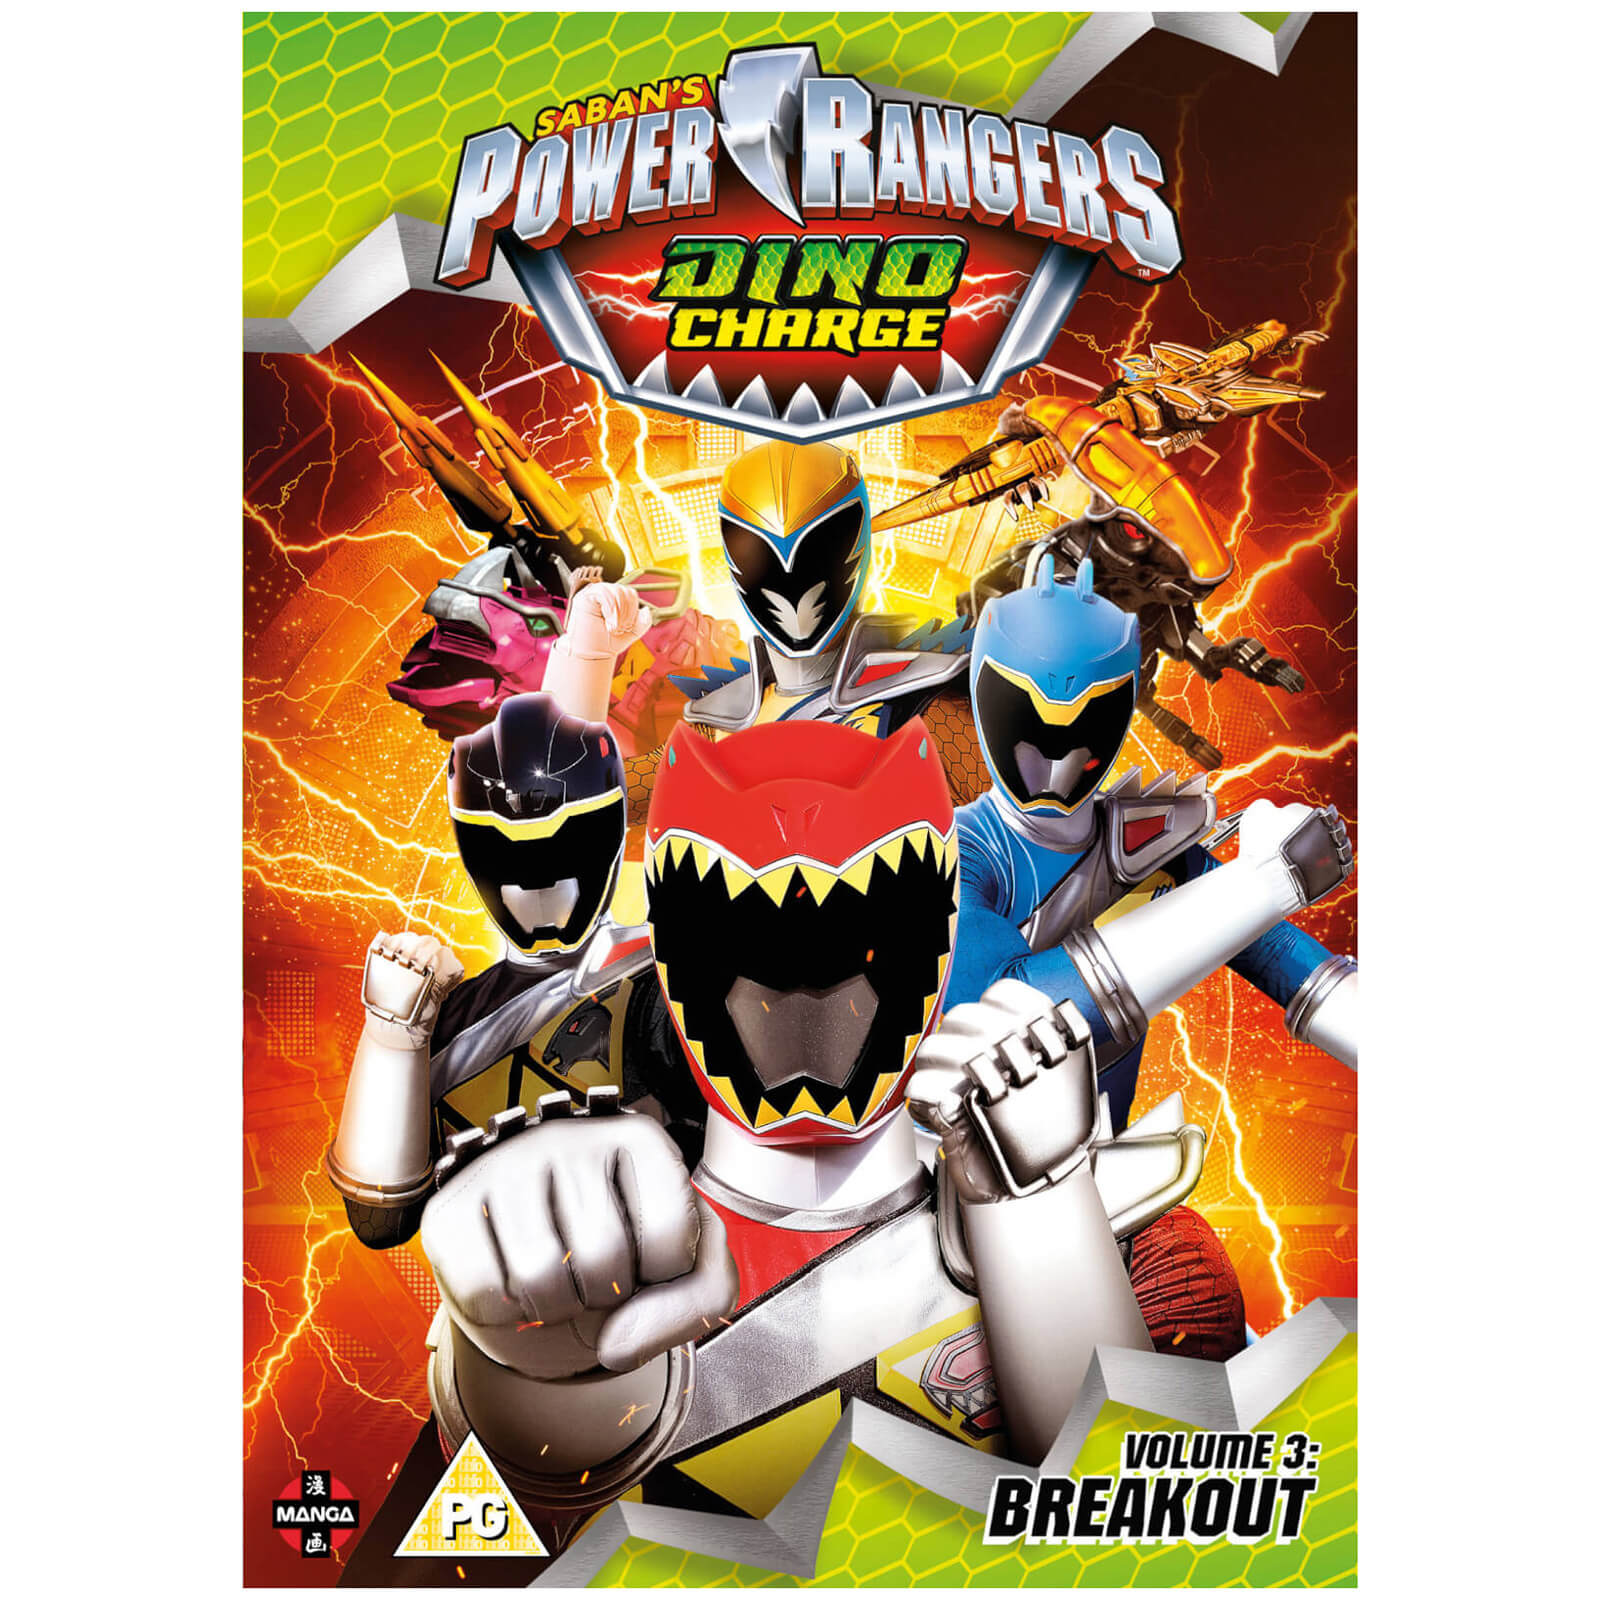 Power Rangers Dino Charge: Breakout (Volume 3) Episodes 9-12